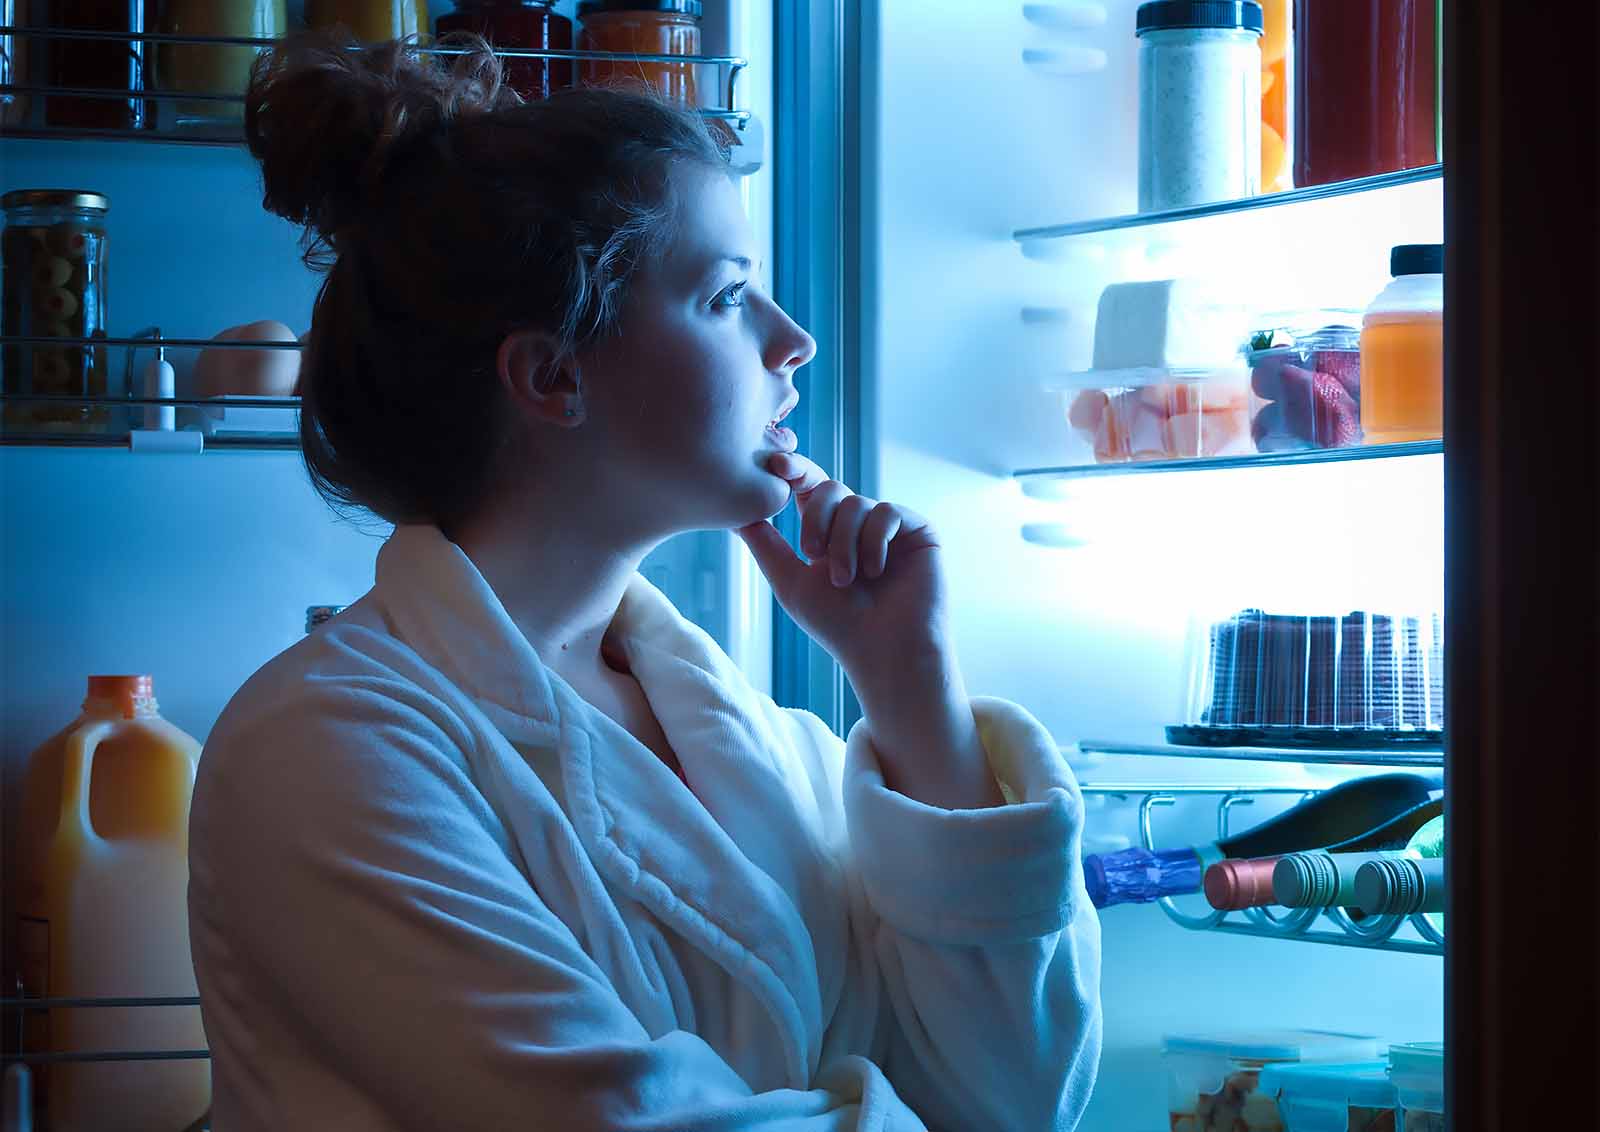 A young woman looks for a healthy late-night snack in the refrigerator.